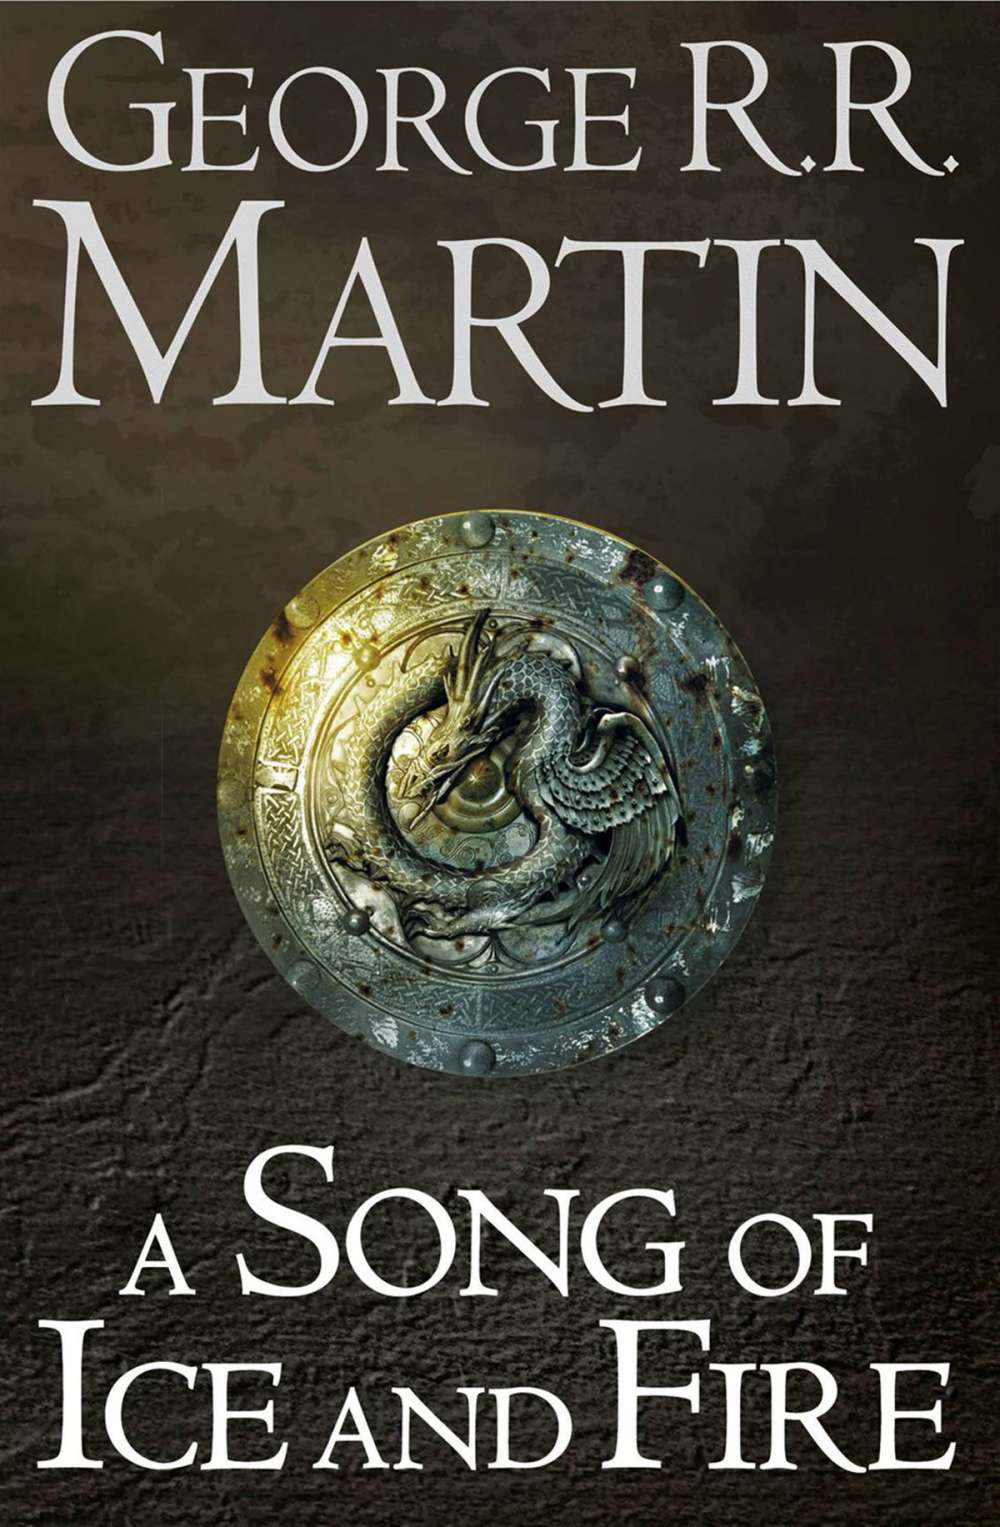 The Game of Thrones series by George R. R. Martin